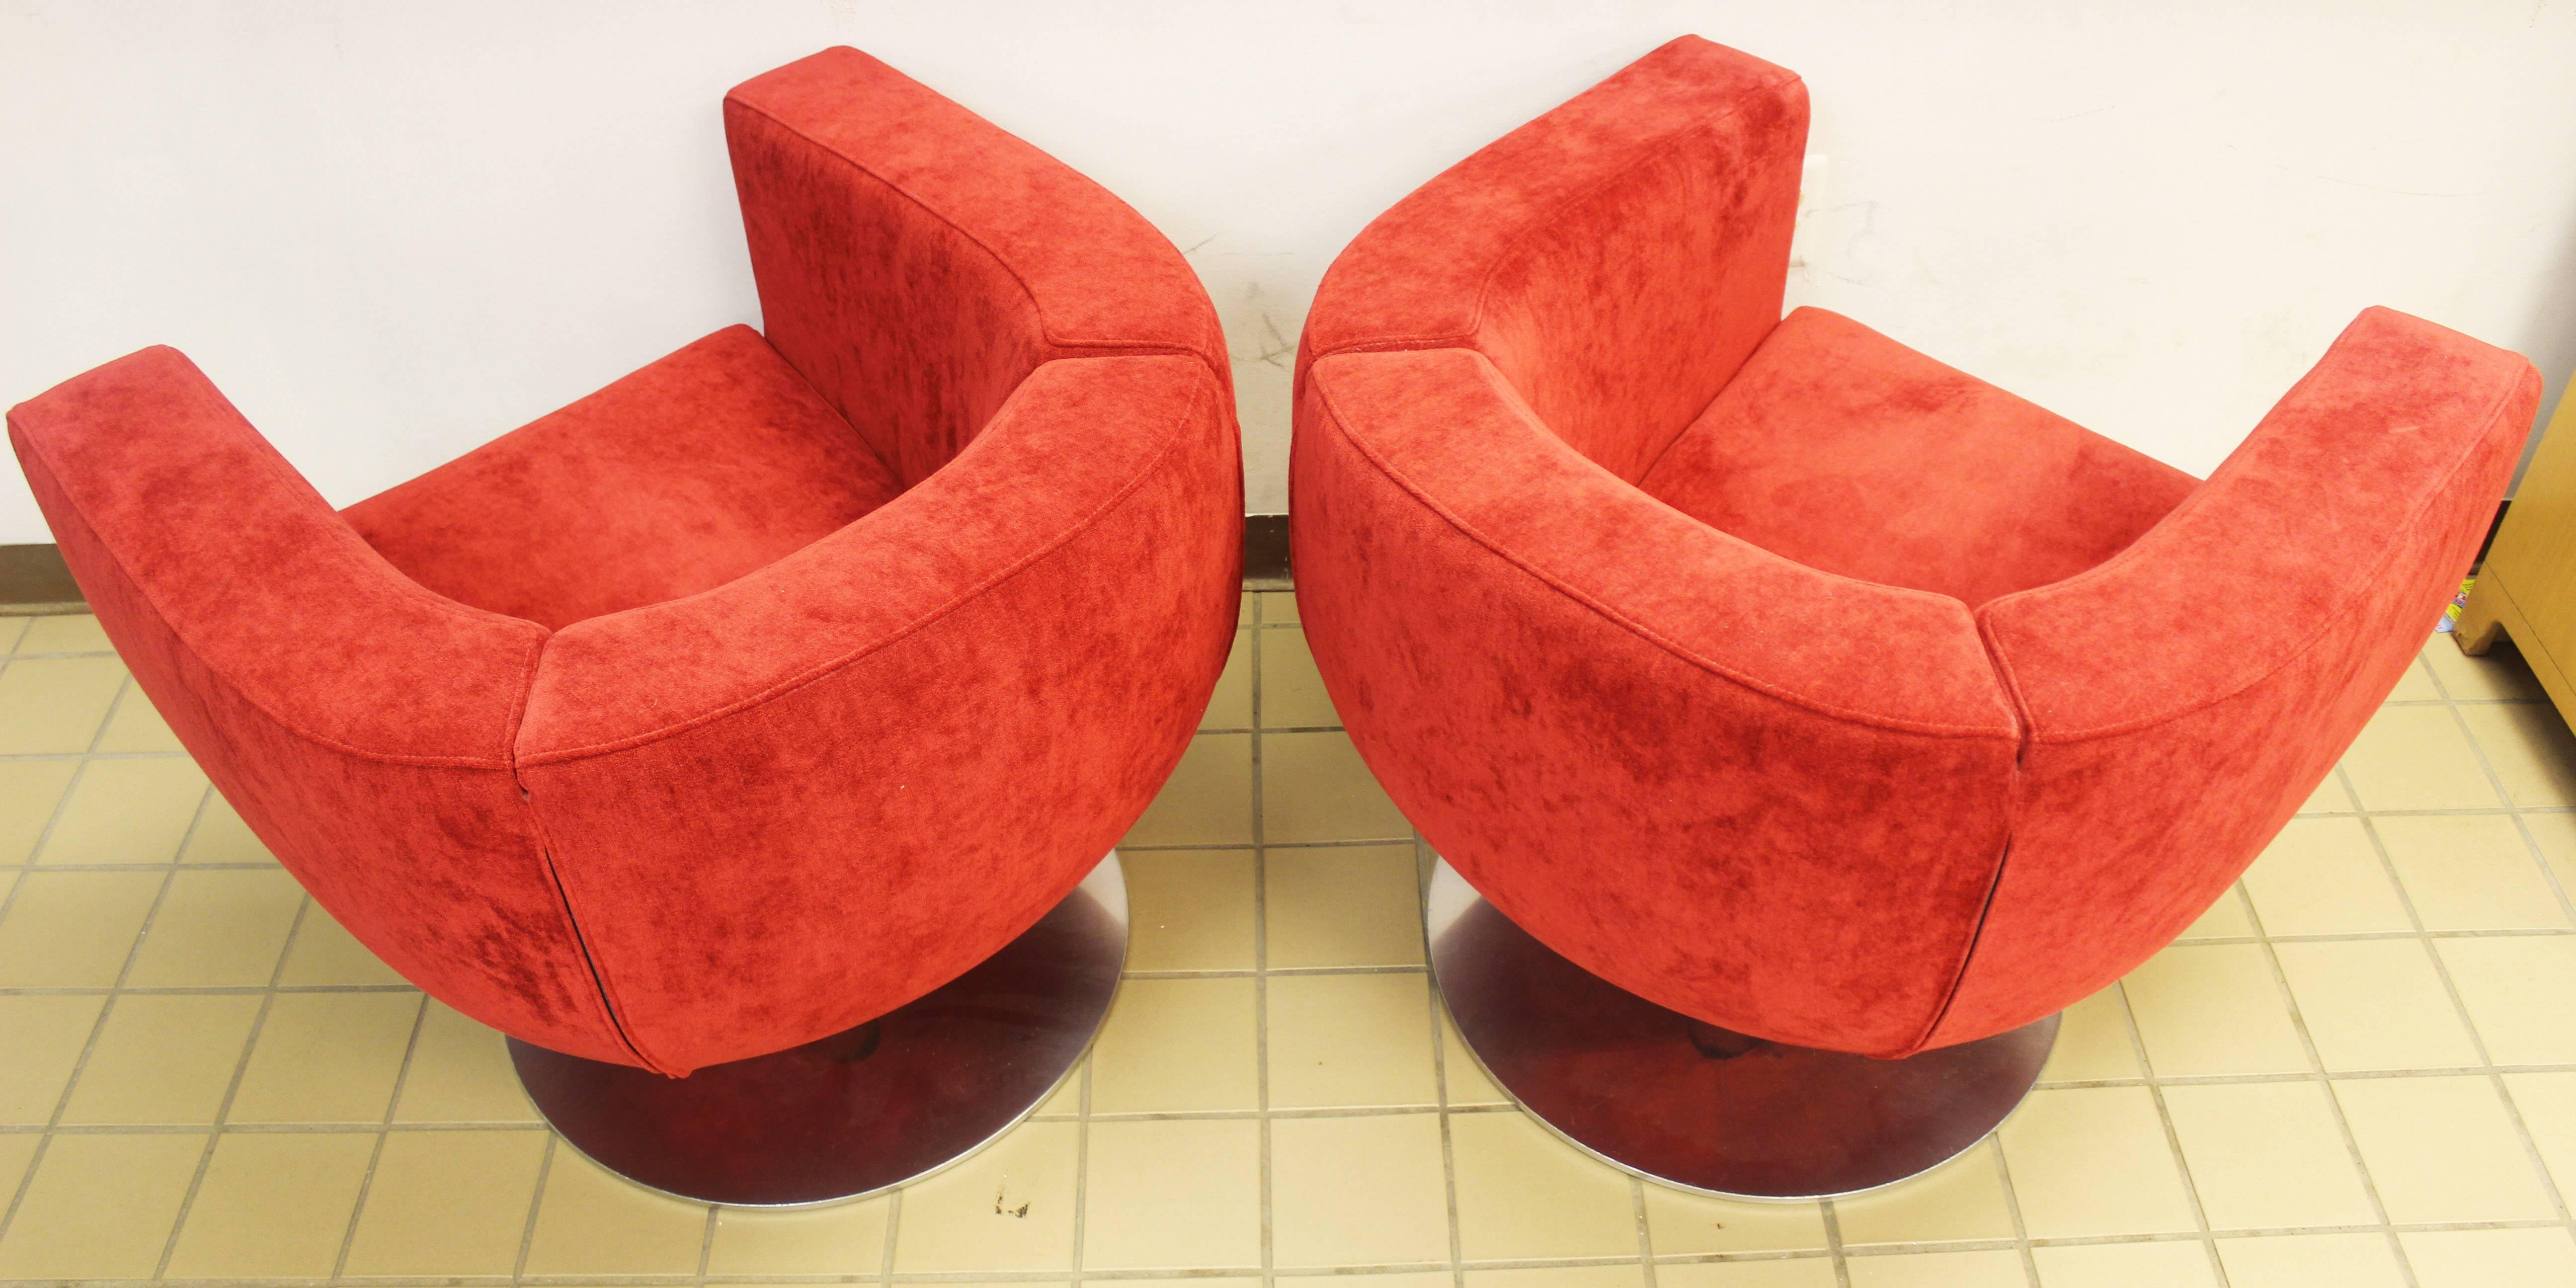 For your consideration is a stunning pair of deep red and chrome tulip swivel armchairs by Jeffrey Bernett for B&B Italia. In excellent condition. The dimensions are 31